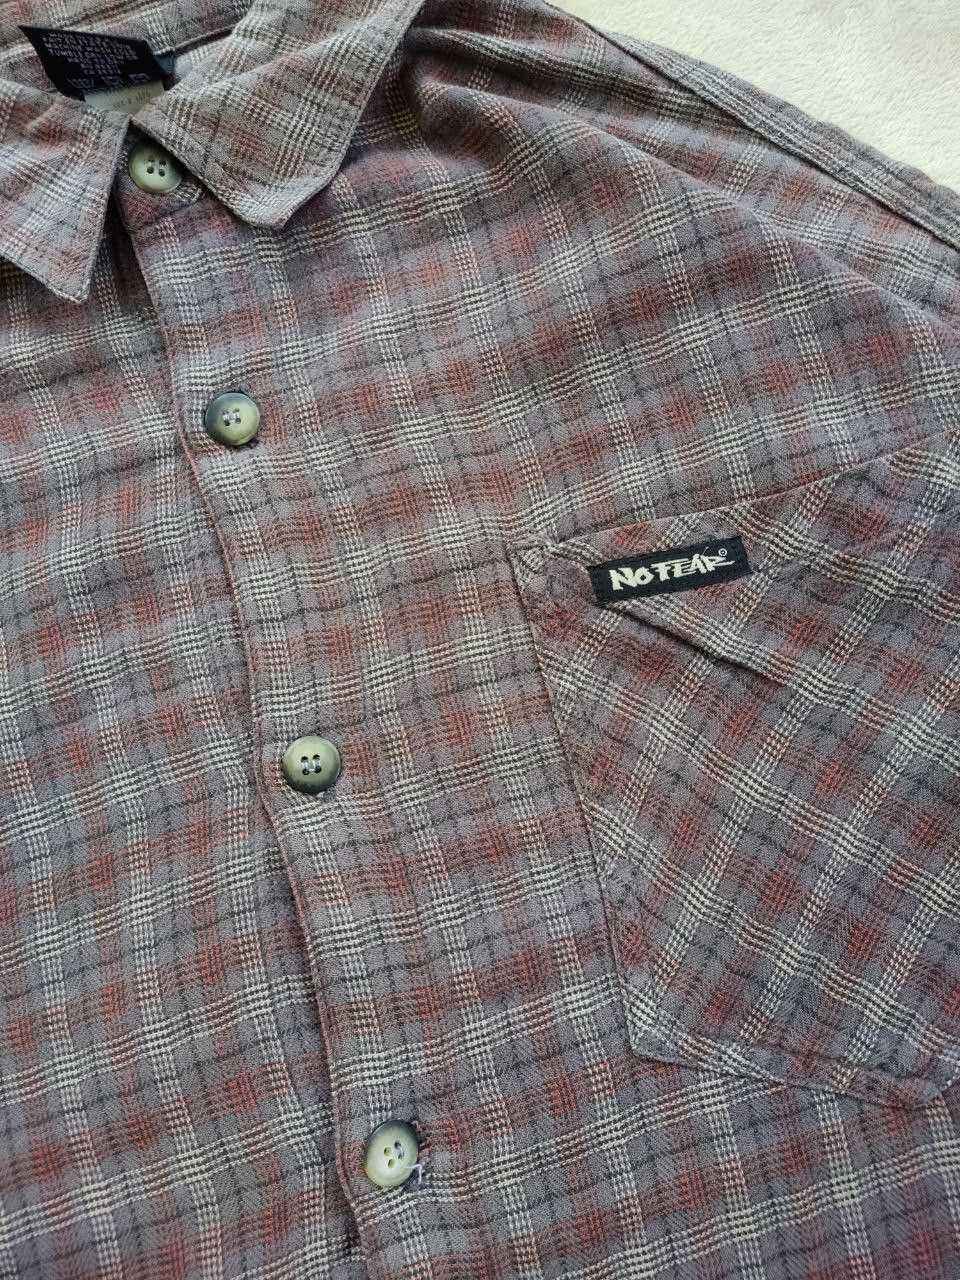 Vintage 90s No Fear Made in USA Old Skool Plaid Shirt - 5